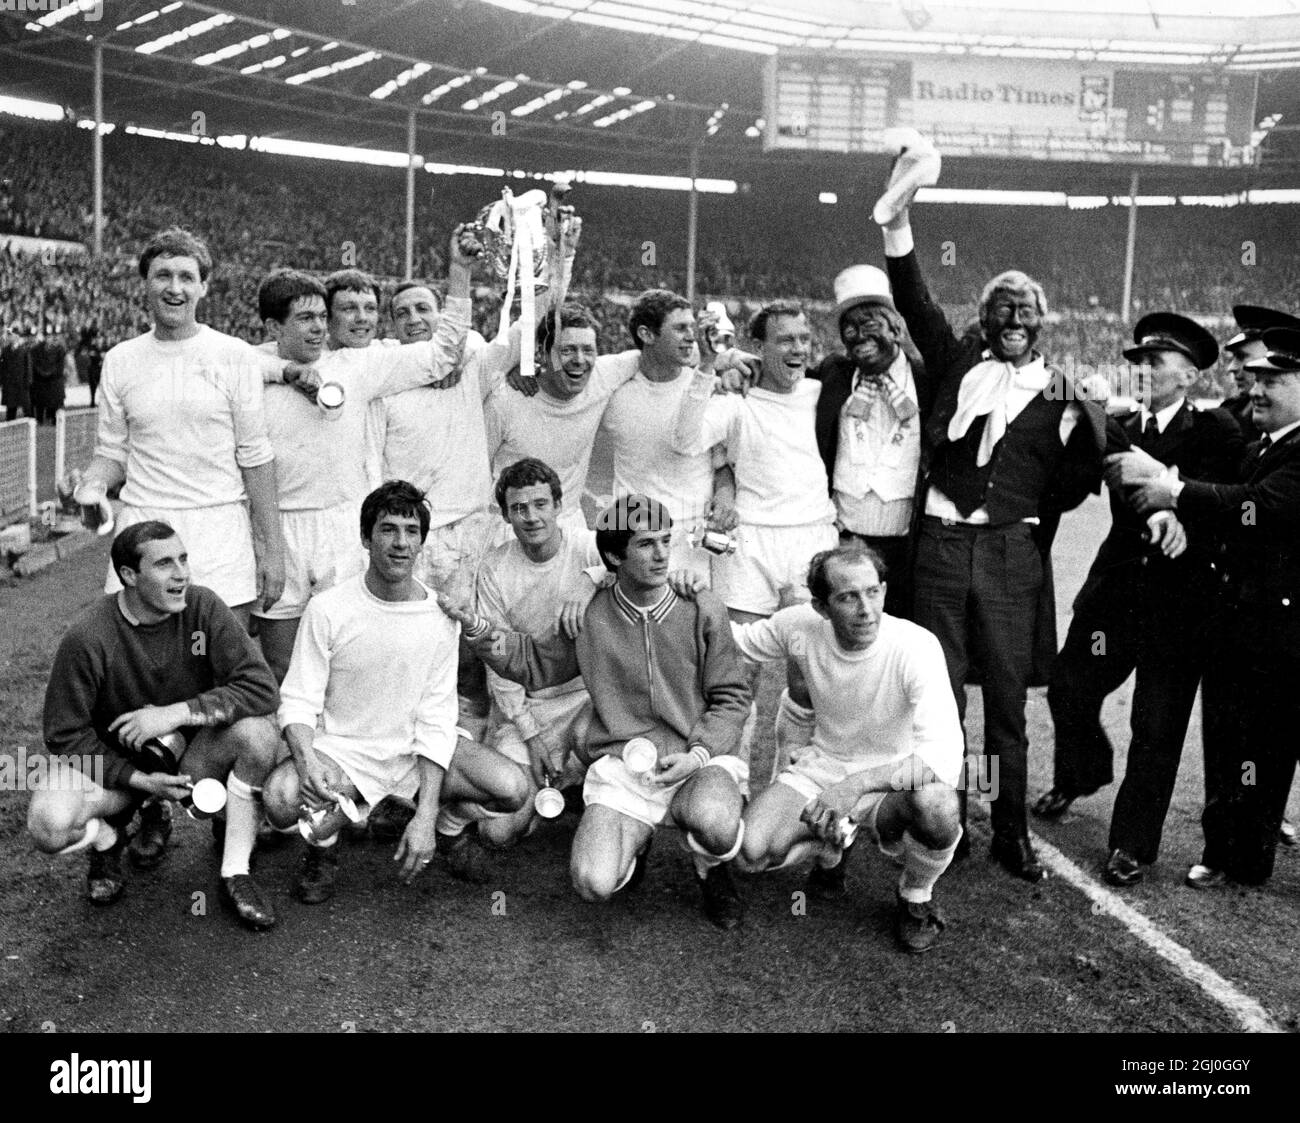 1967 League Cup Final QPR v West Bromwich Albion Two enthusiastic spectators dressed as 'minstrels' join the QPR team as they pose for photos after their victory in the league cup final against West Bromwich Albion. 4th March 1967 Stock Photo